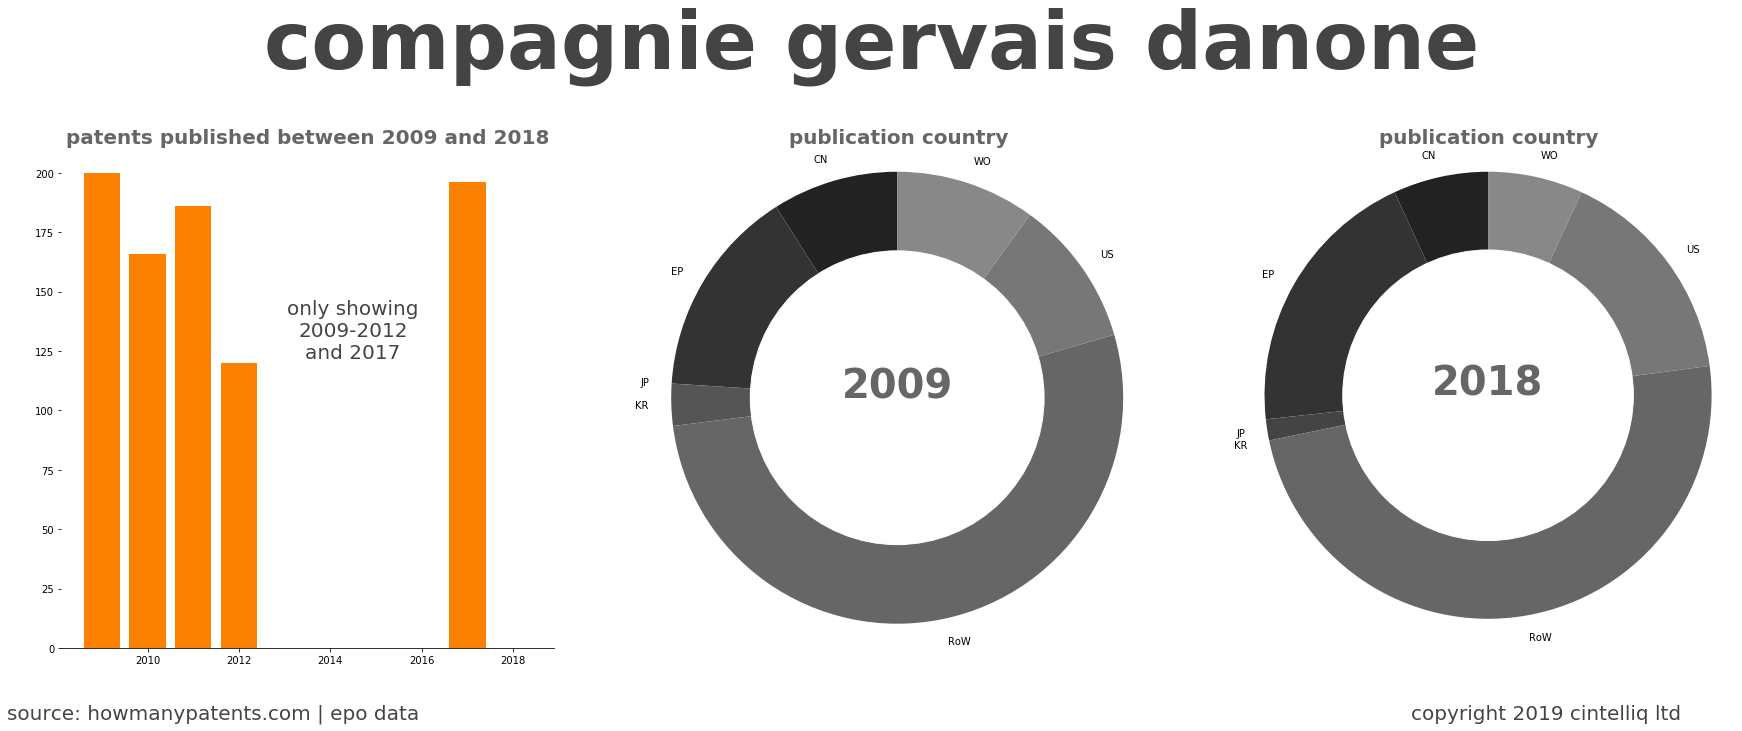 summary of patents for Compagnie Gervais Danone